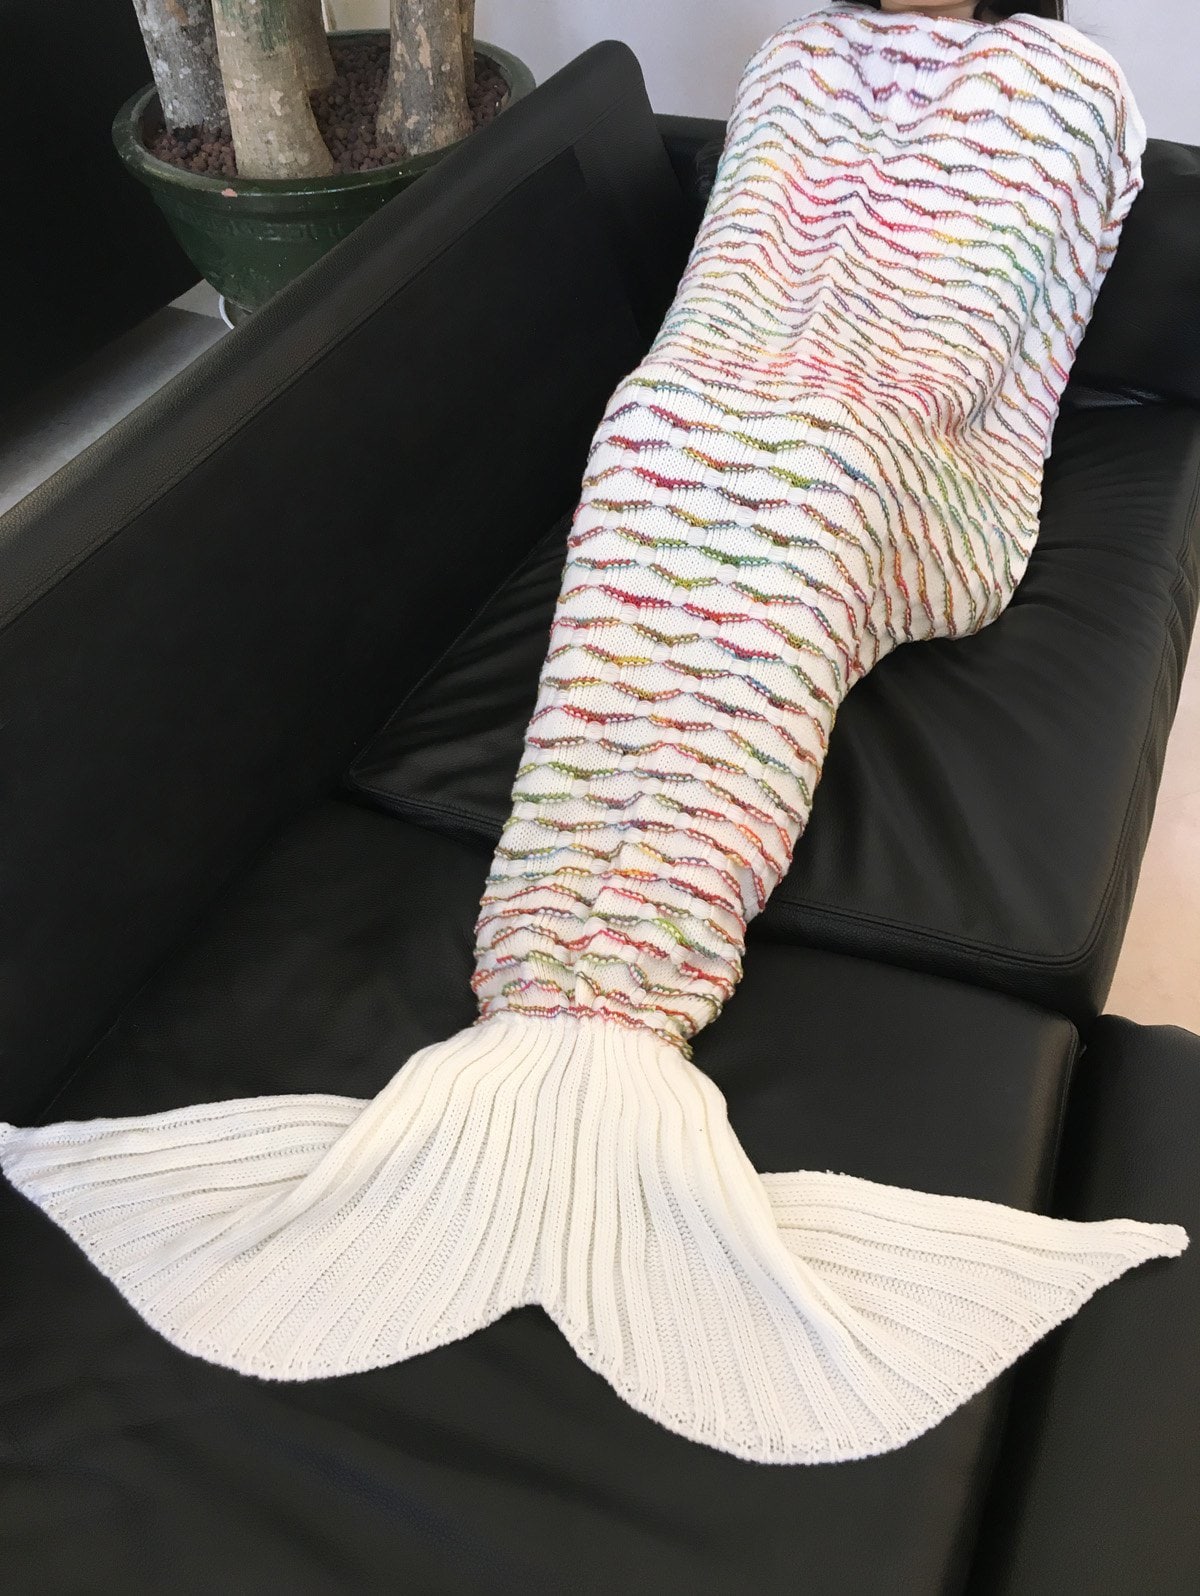 Fashionable Scrambled Pattern Warmth Knitted Mermaid Tail Design Blanket